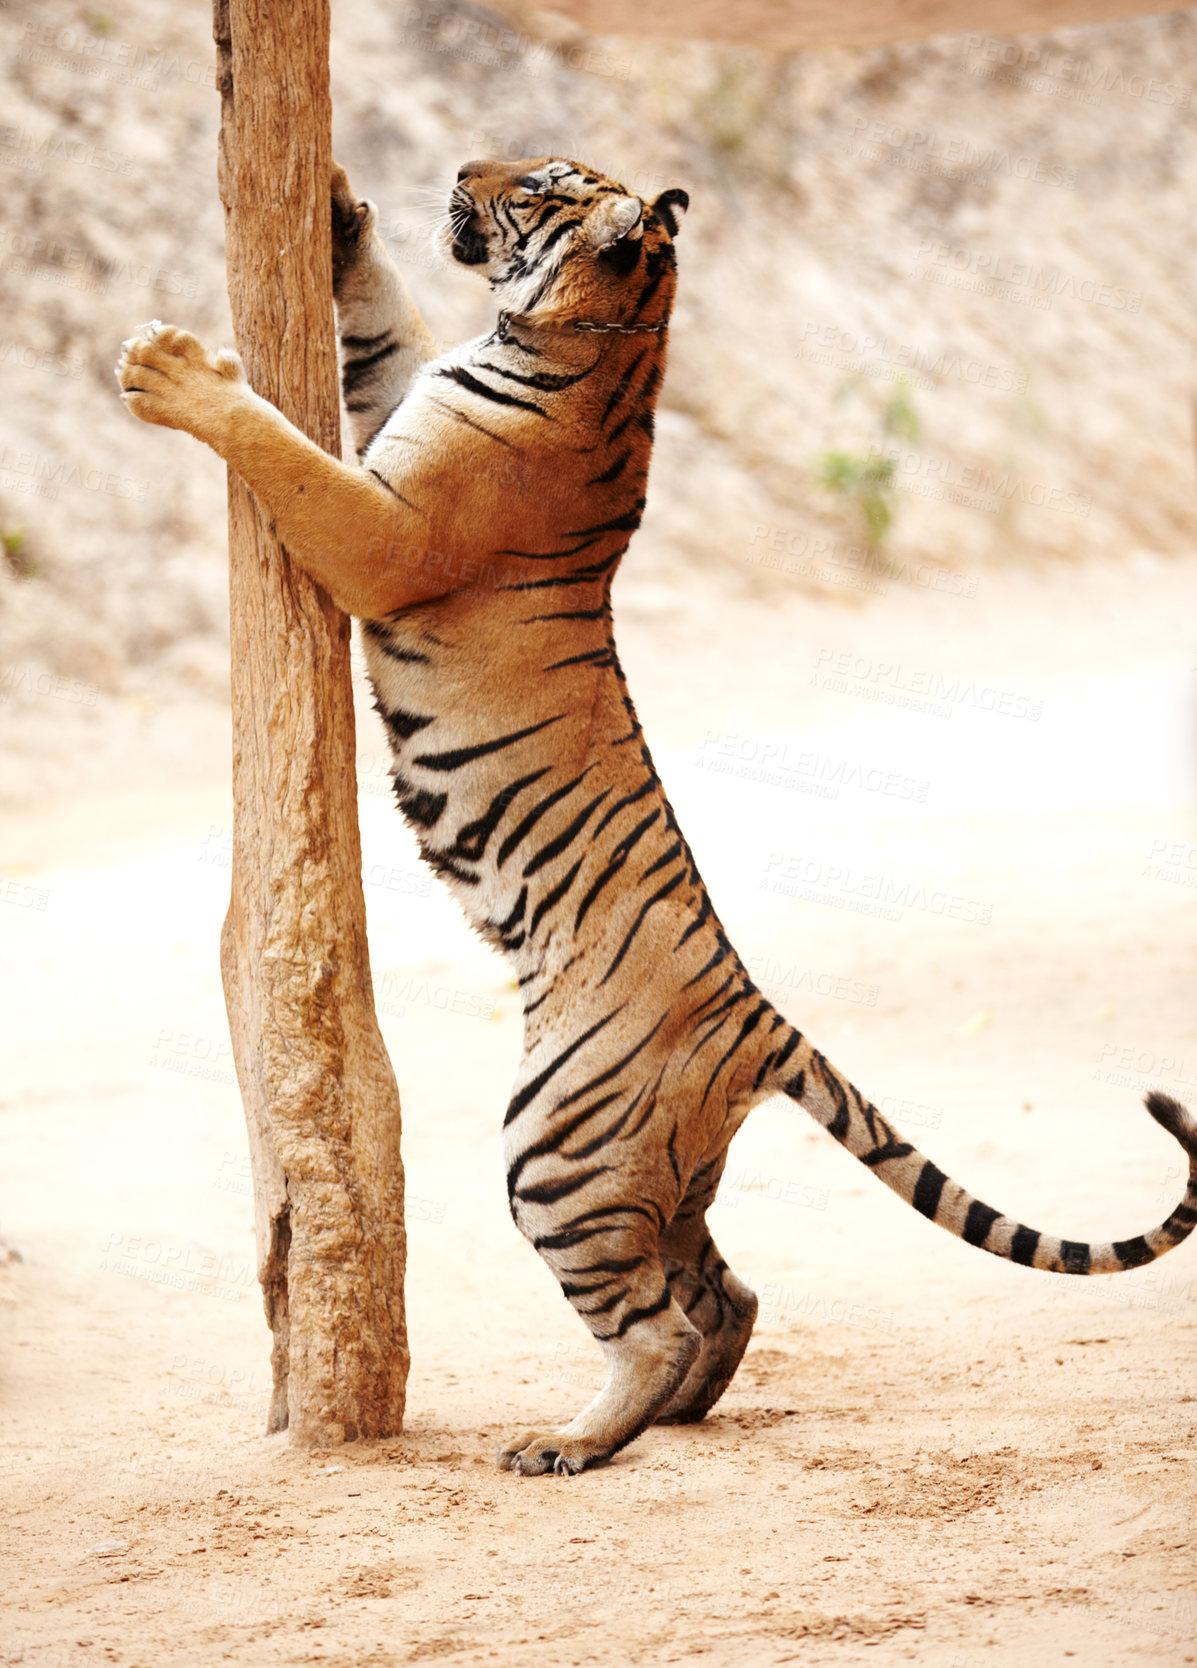 Buy stock photo Tiger standing on hind legs scratching a pole. Big wildlife tiger upright on back paws barking up a thick wooden stick, sharpening its claws. Dangerous wild cat animal in its habitat in the wilderness